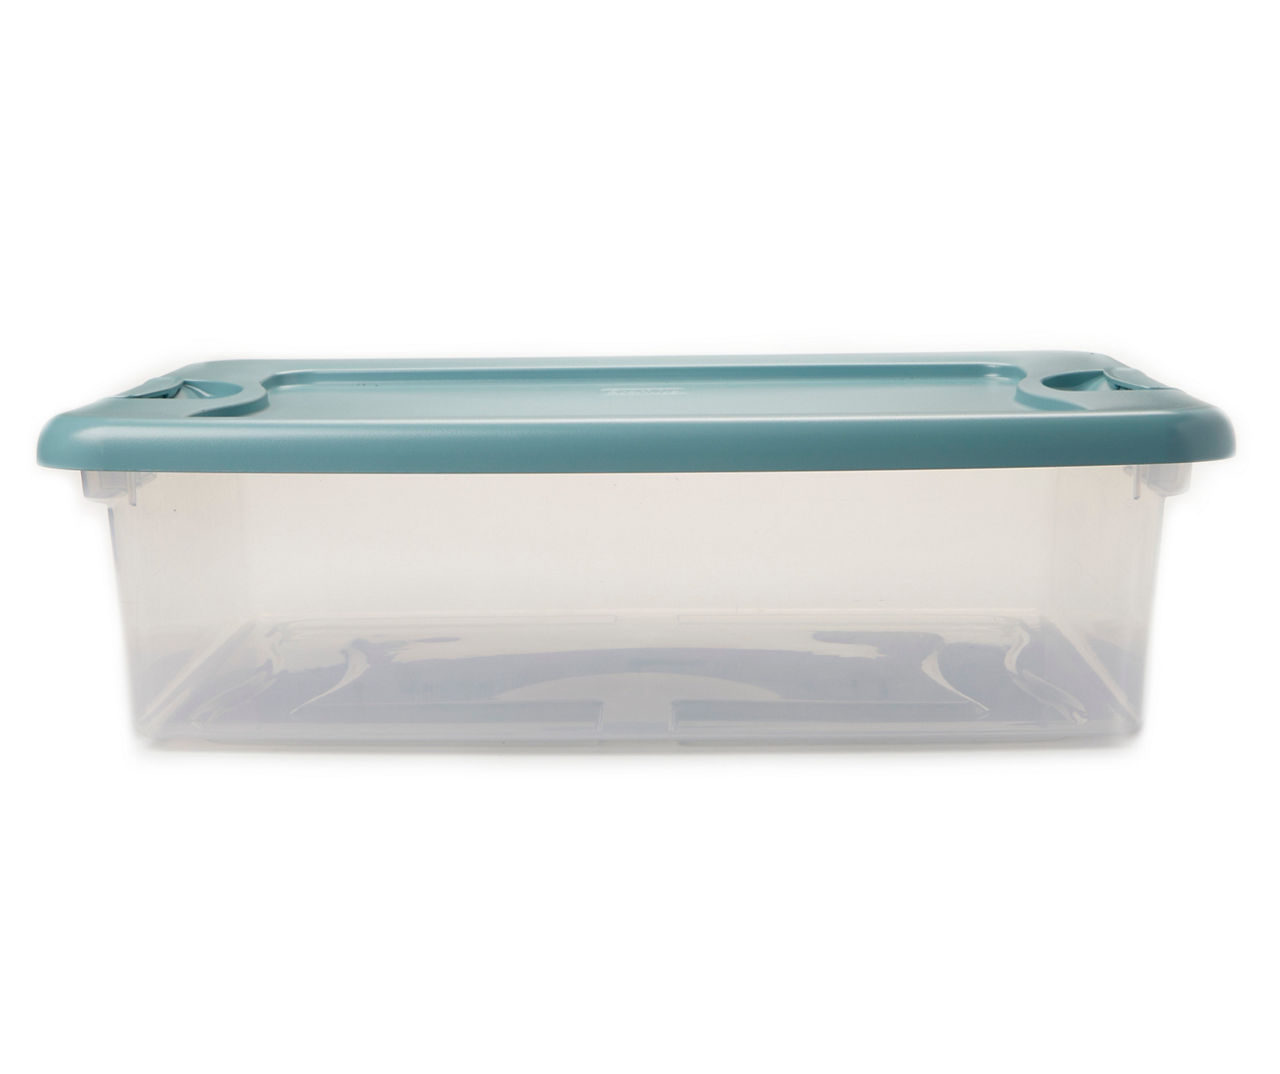 Sterilite 32-Qt. Teal & Clear Latch Storage Tote With Lid